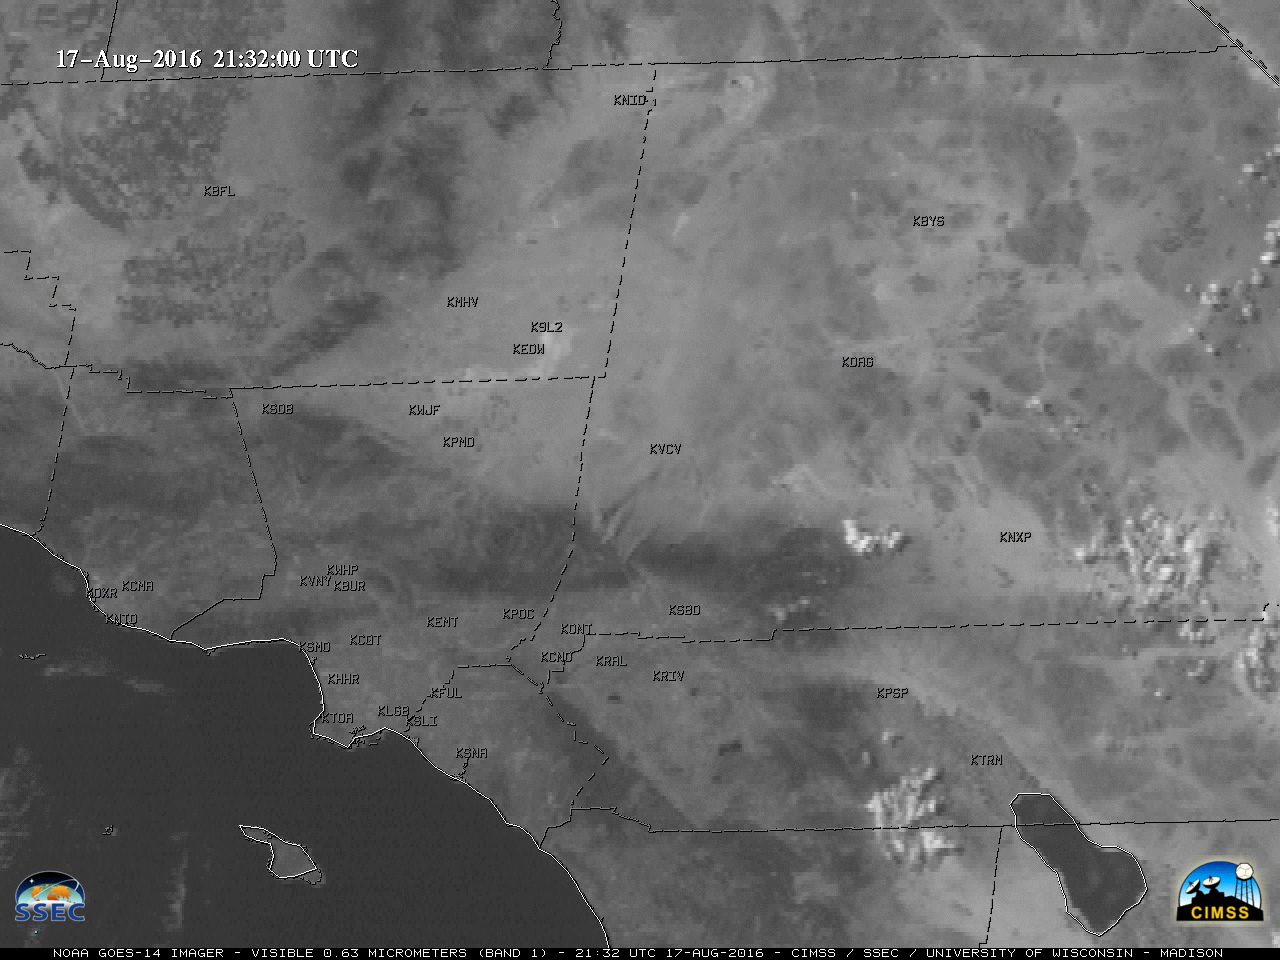 GOES-14 Visible (0.63 µm) images, with county outlines and 4-character airport identifiers [click to play MP4 animation]